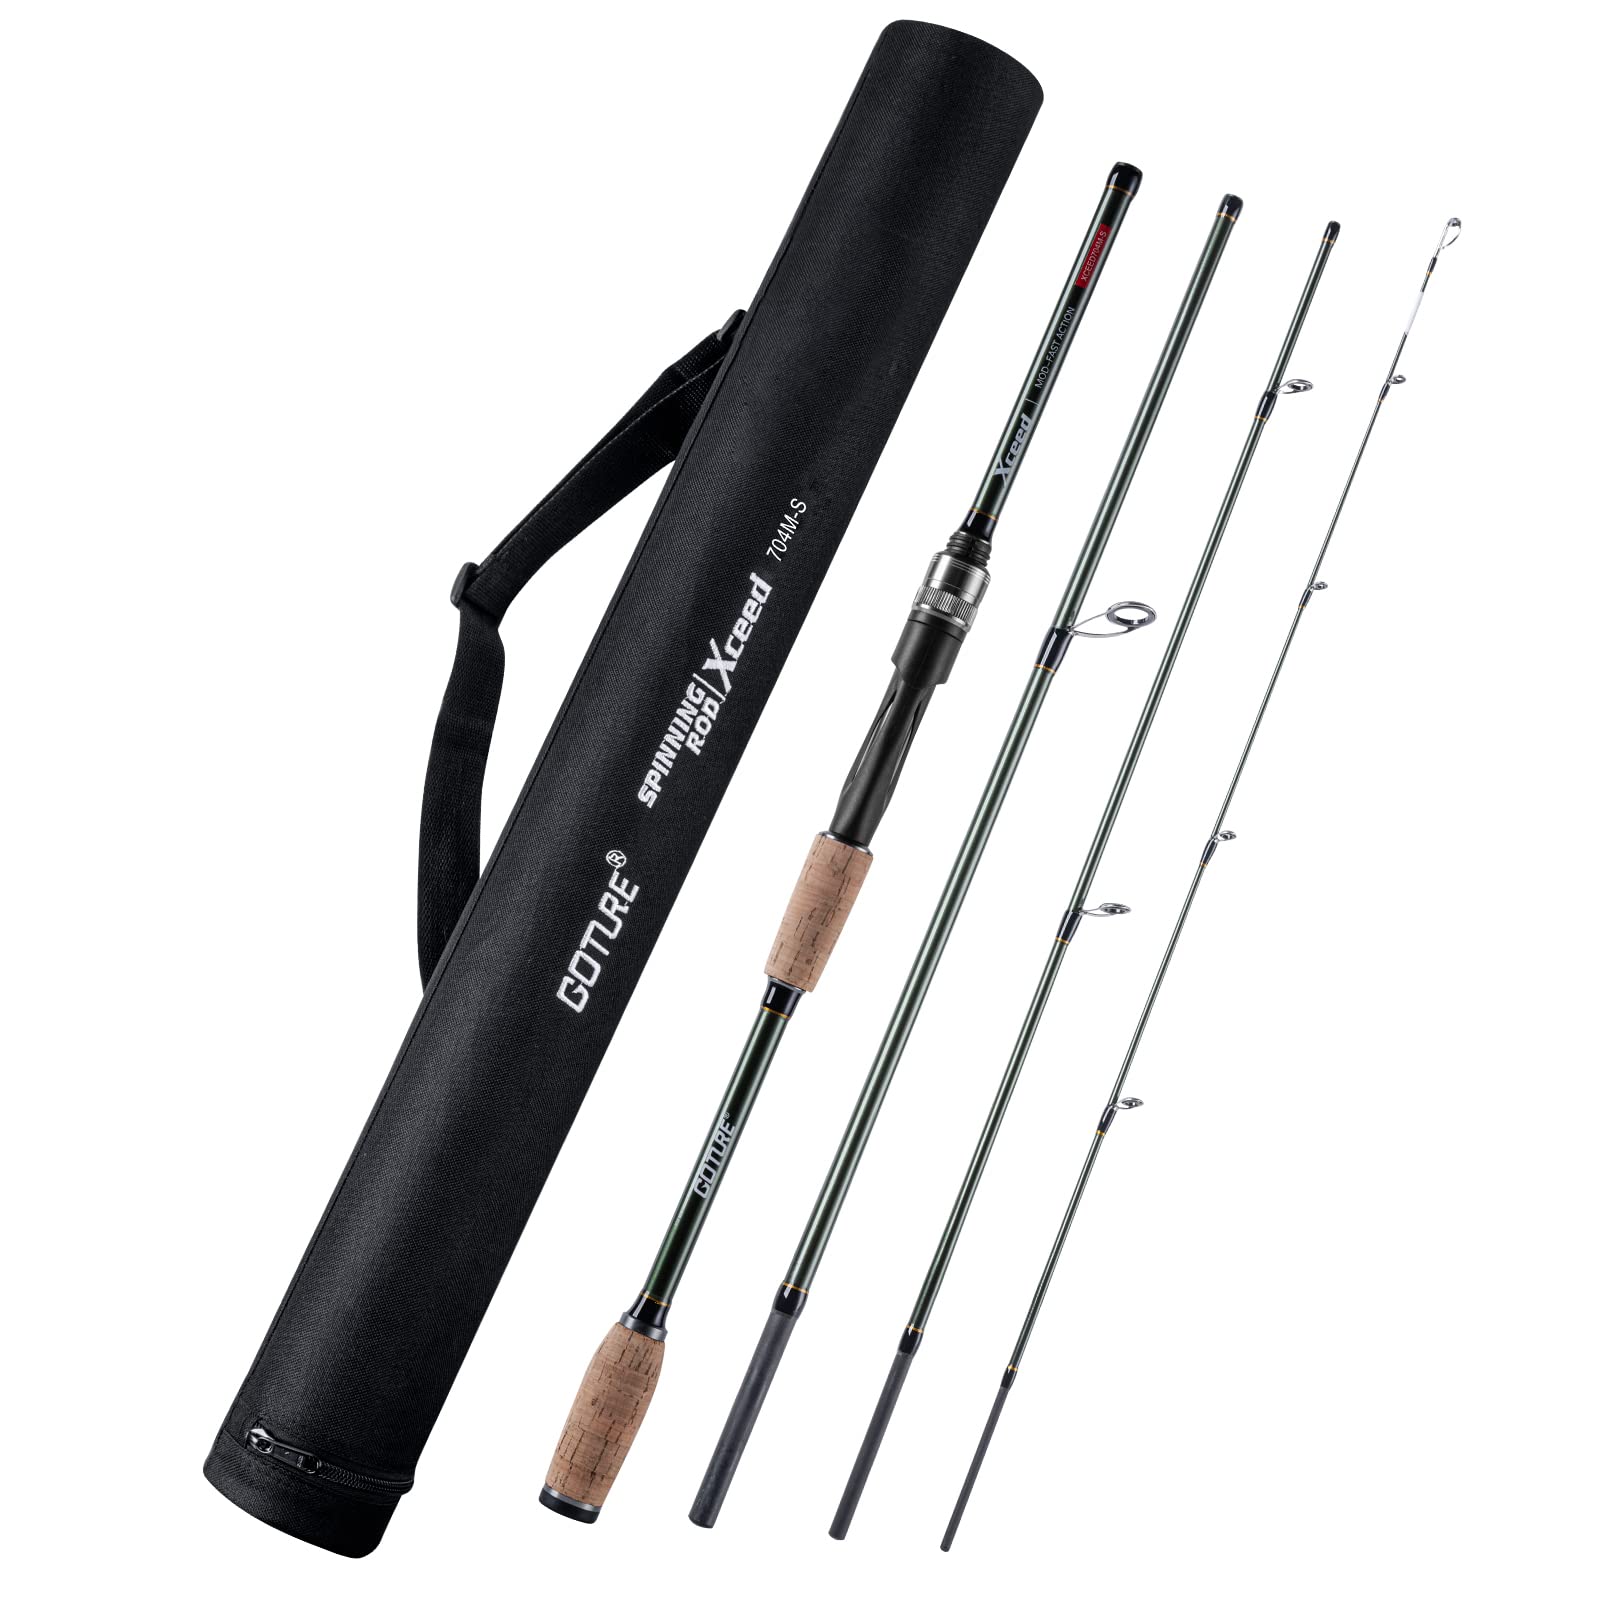 Goture Travel Fishing Rods 2 Piece/4 Piece Fishing Pole with Case/Bag Fly  Fishing Kit/